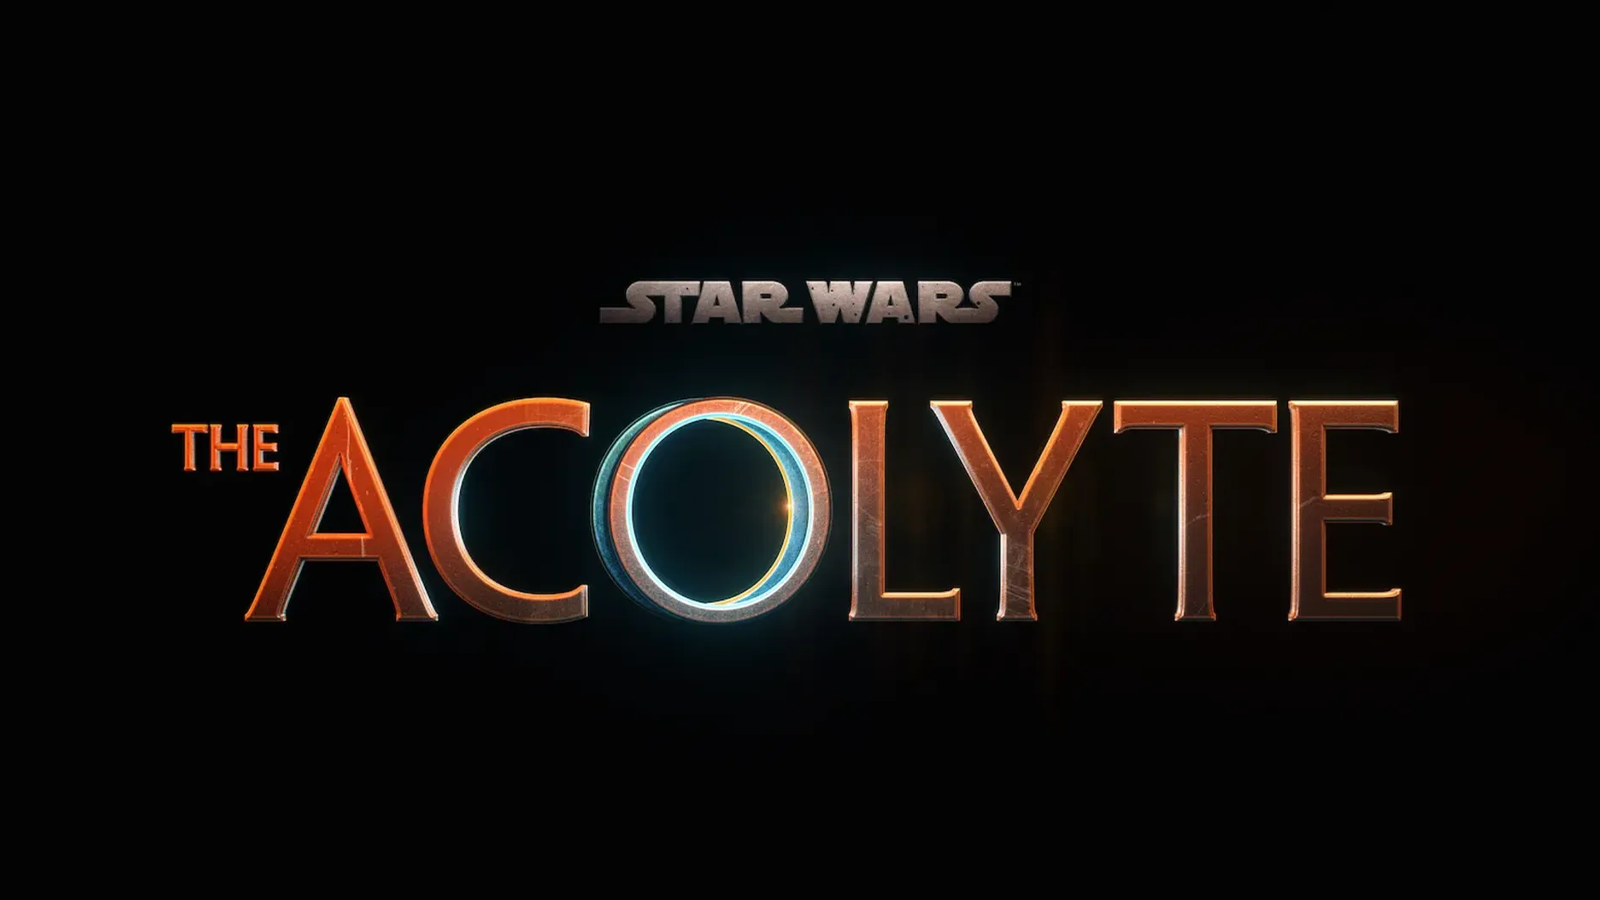 Star Wars The Acolyte's logo